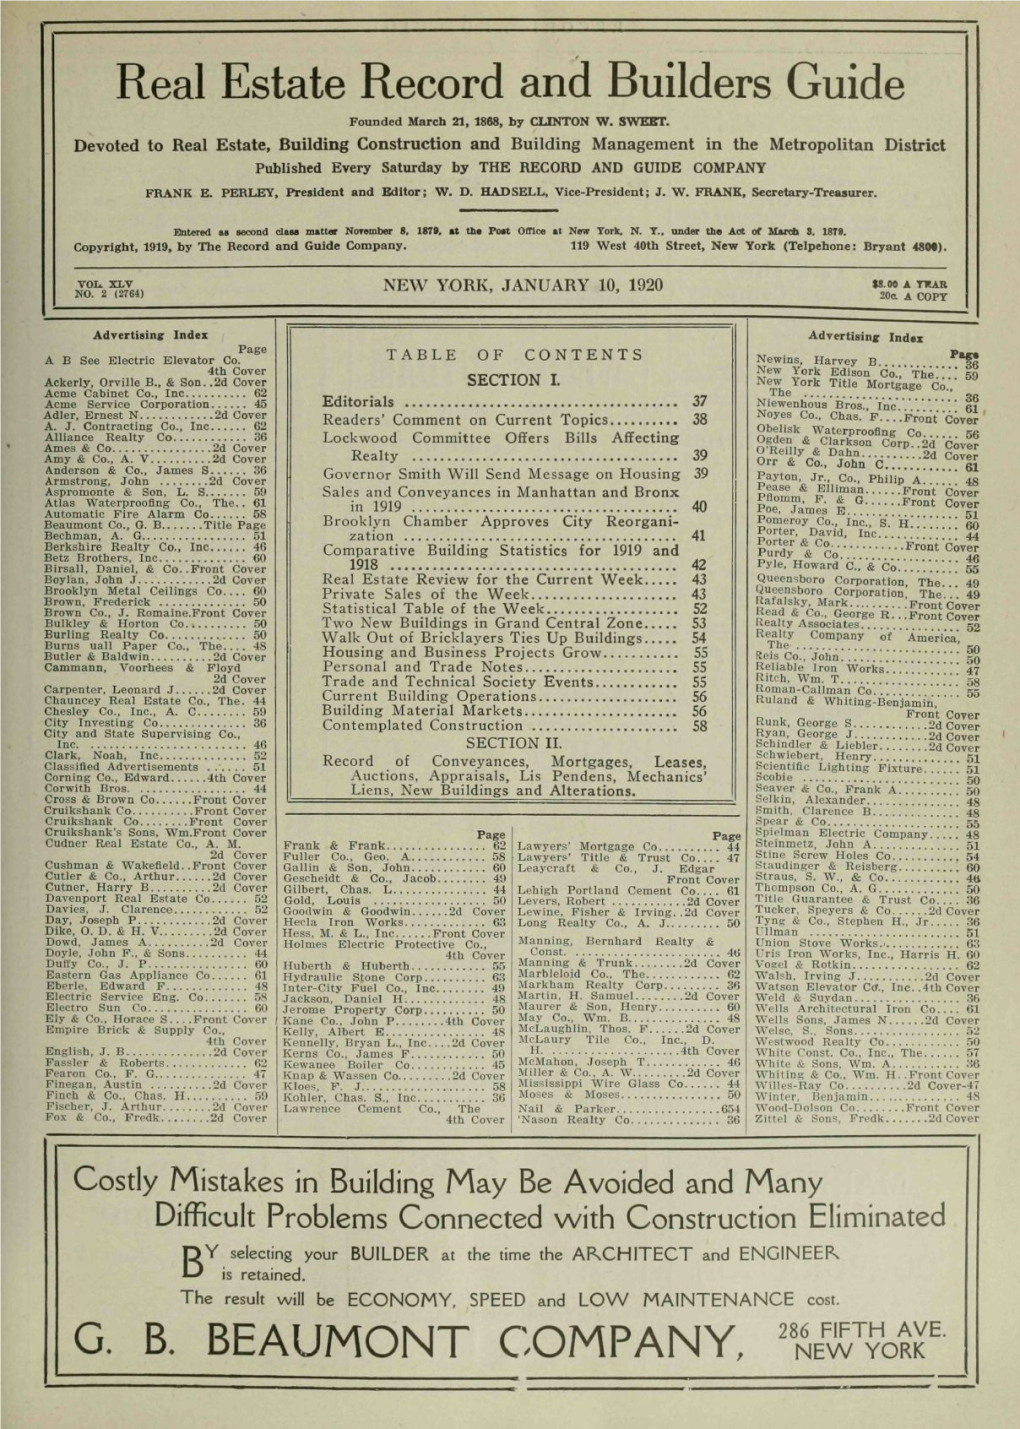 Real Estate Record and Builders Guide Founded March 21, 1888, by CLINTON W